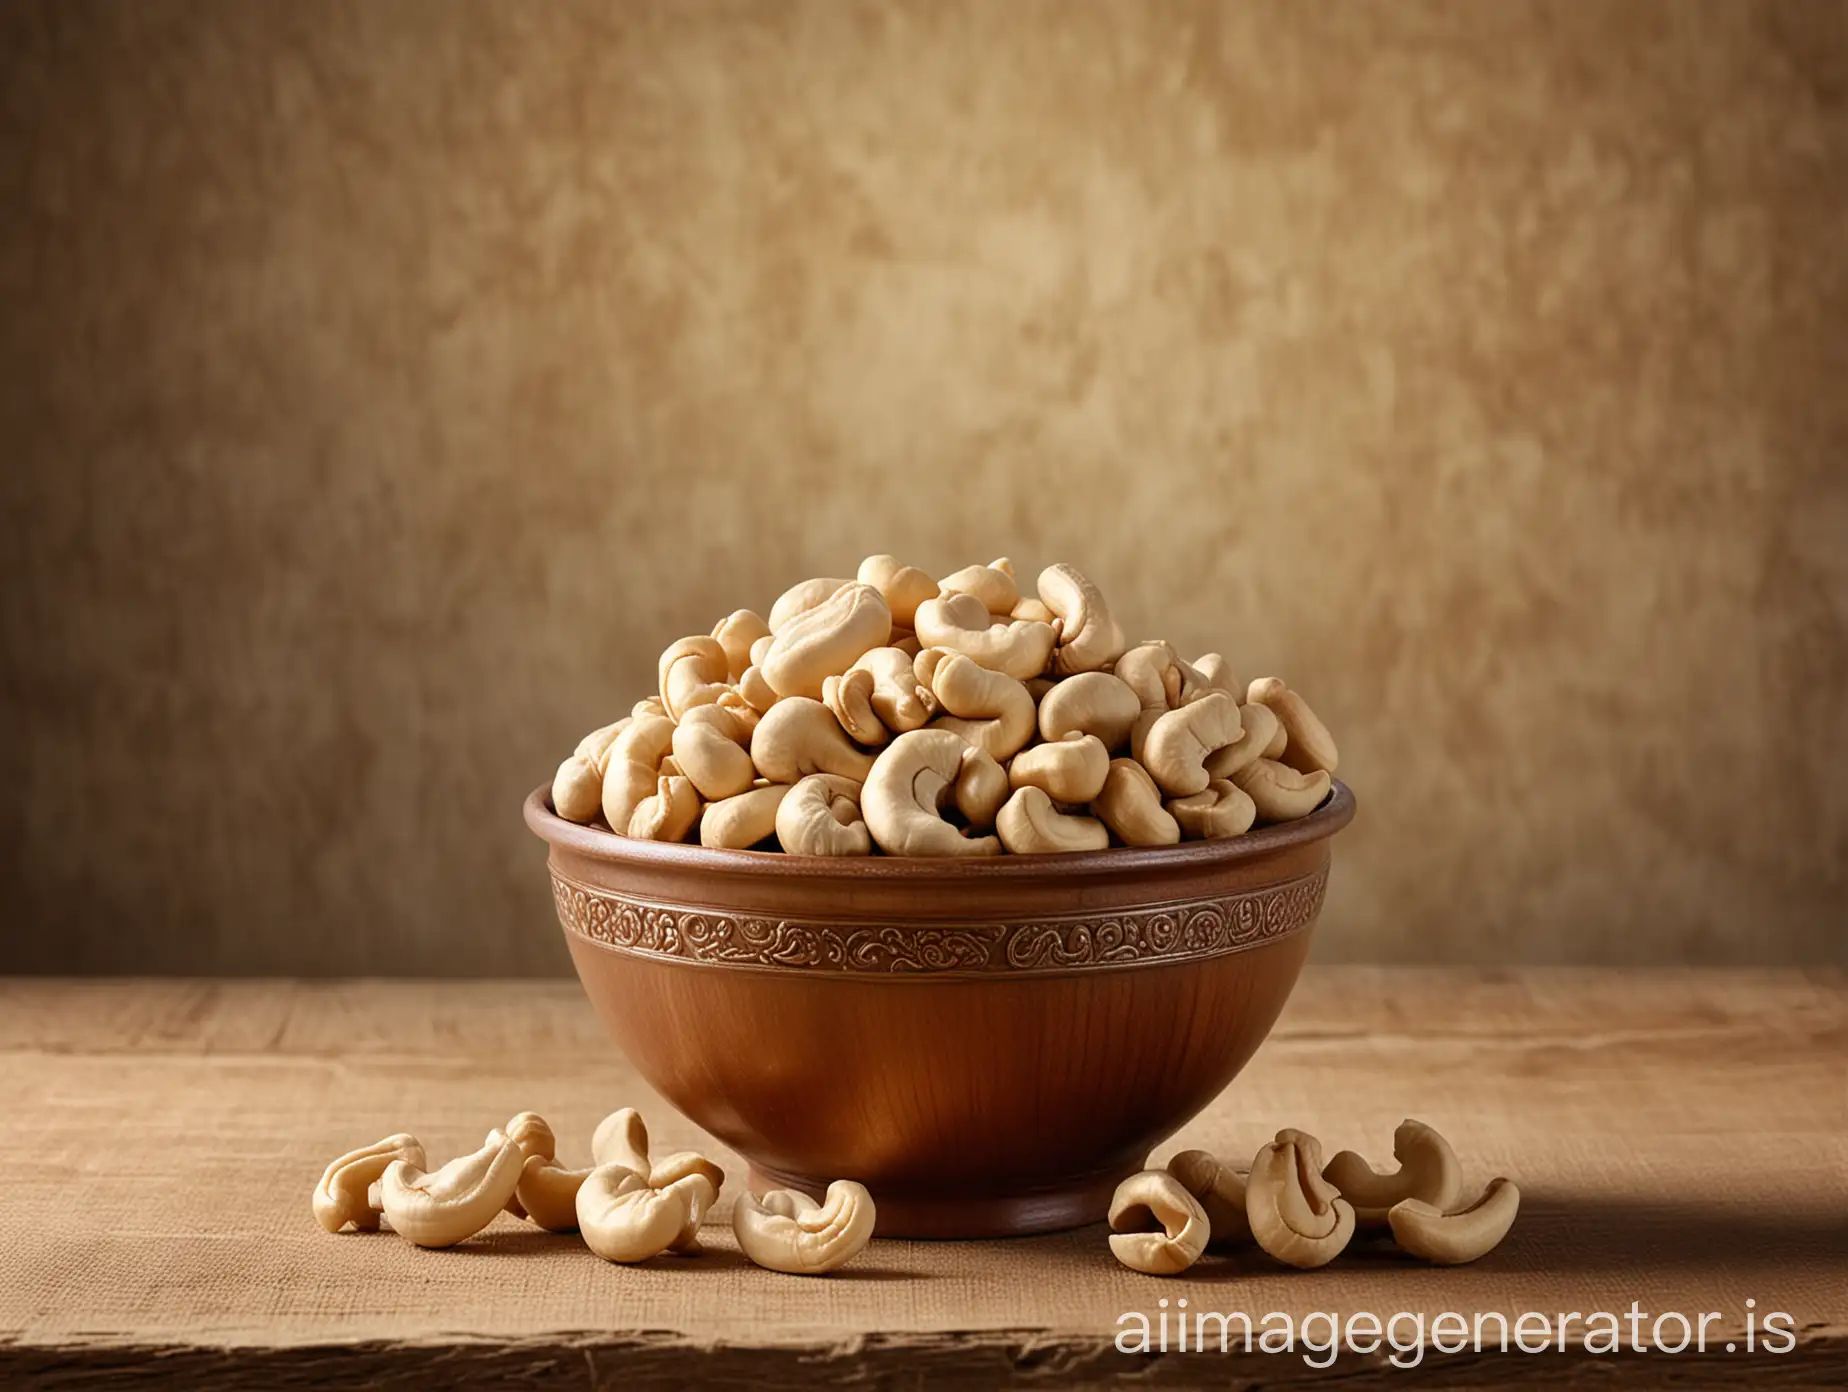 Cashew-Nut-in-Bowl-on-Vintage-Background-Realistic-Nut-Bowl-Photography